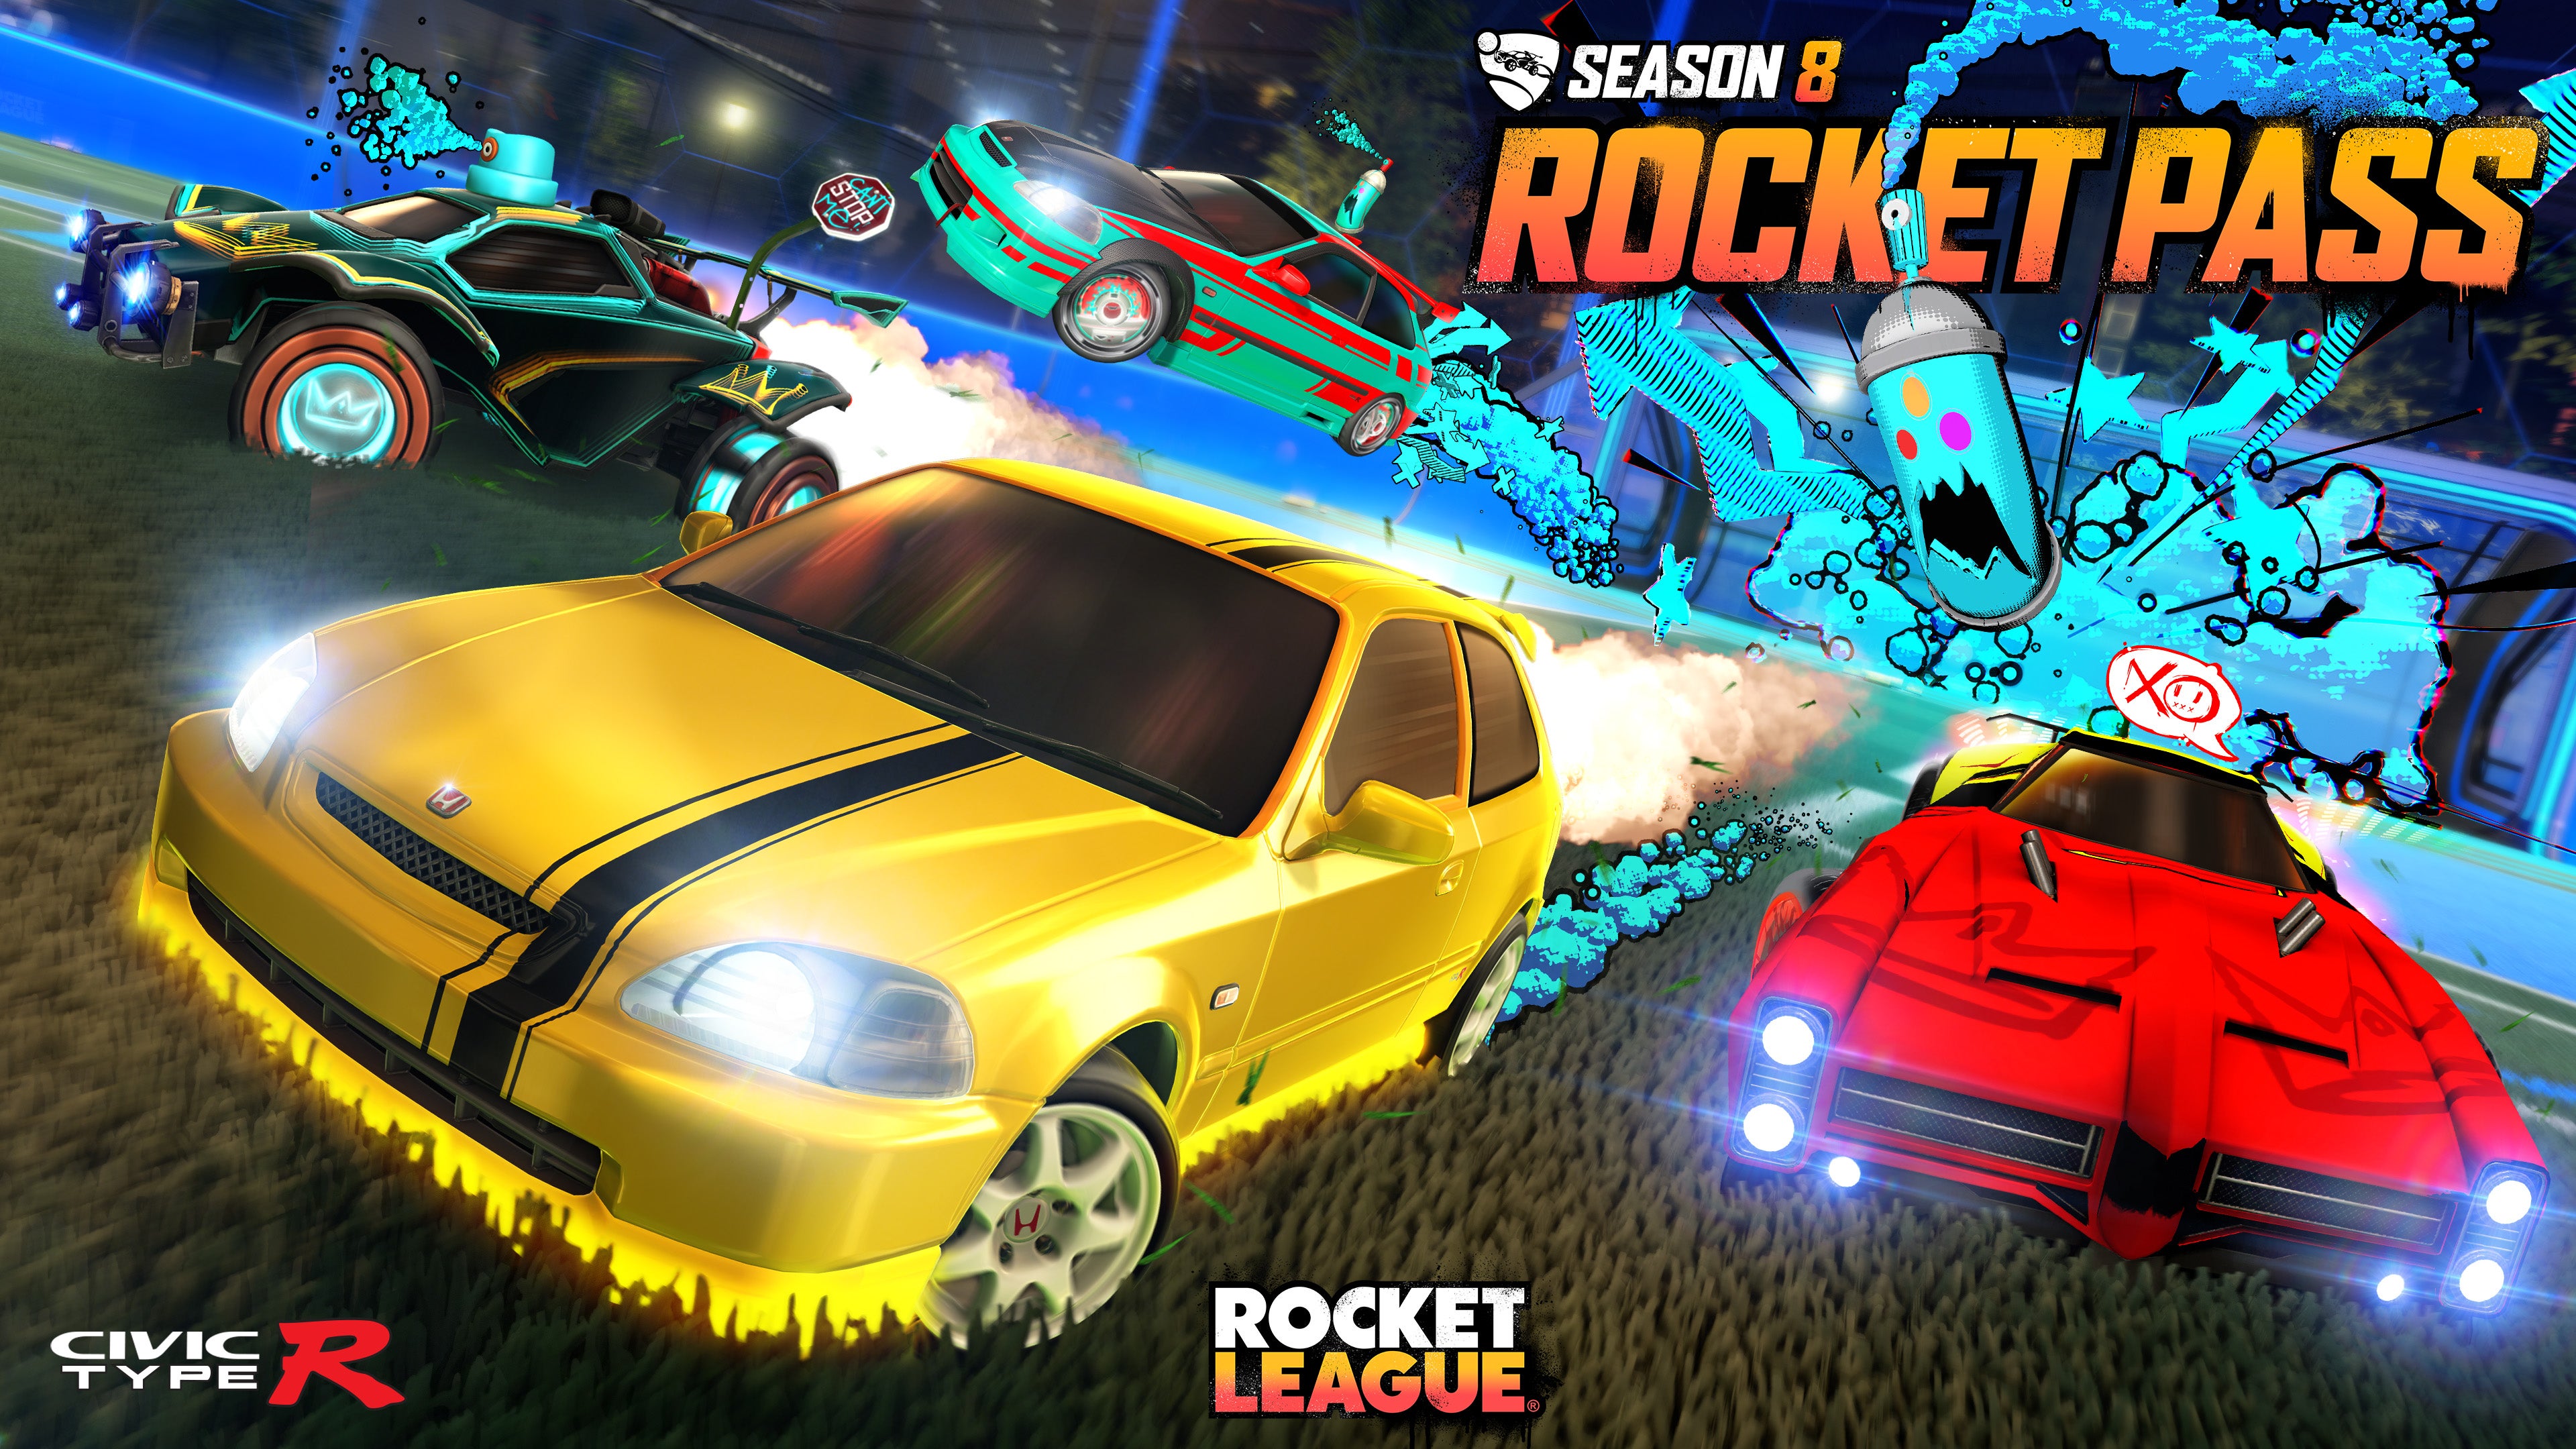 Rocket League season 8 goes live September 7, with a new car, arena, and mo...